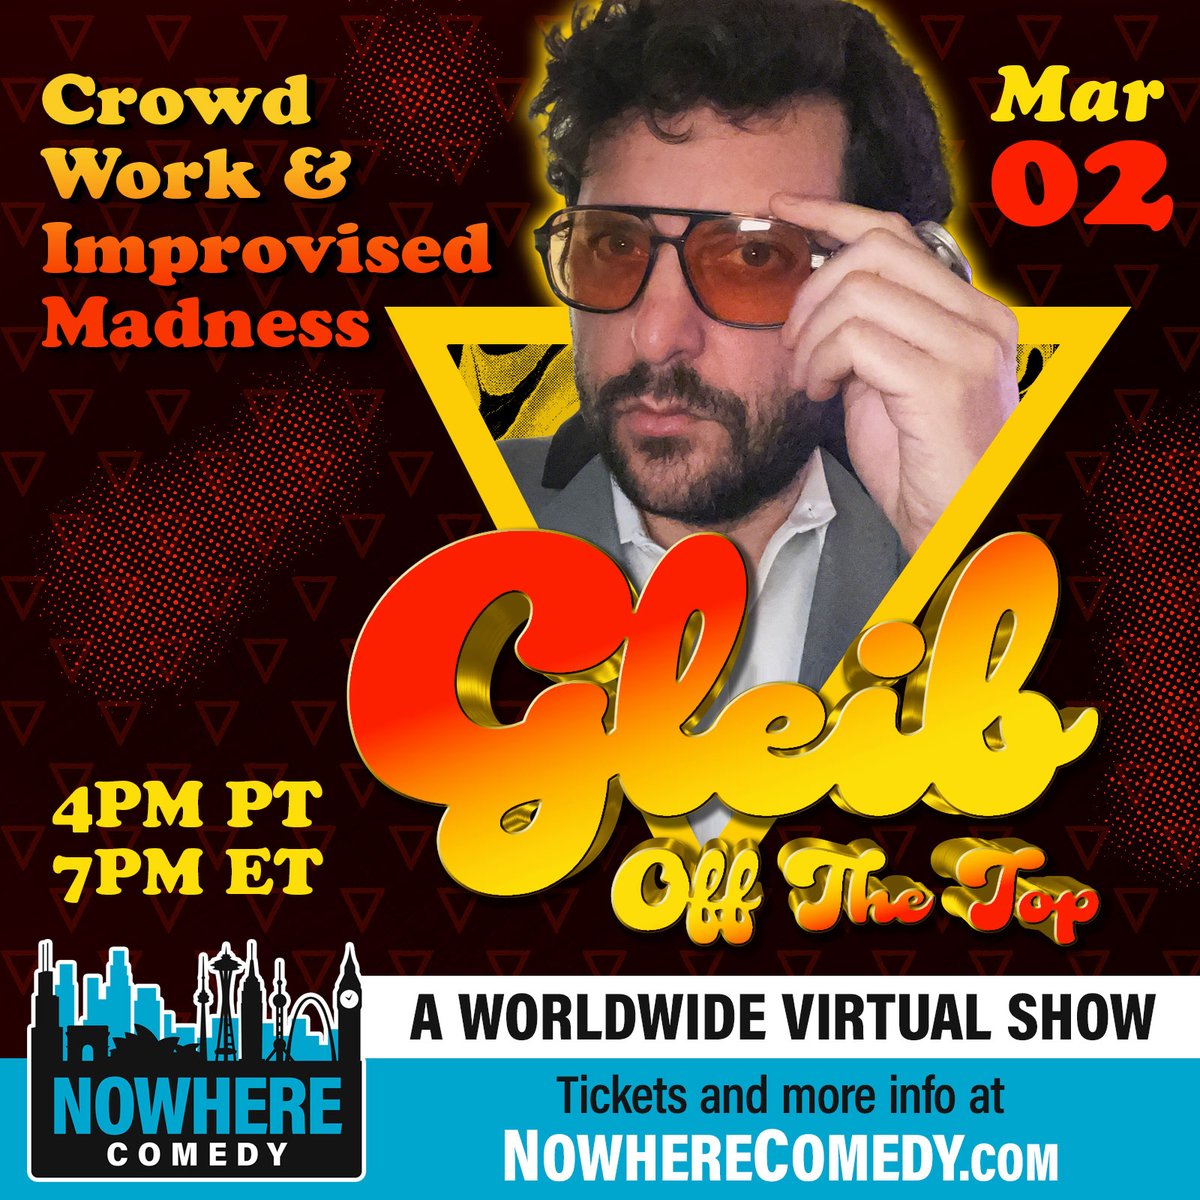 Catch 'Gleib Off the Top' with @bengleib at 4PM PT/7PM ET! Expect a thrilling improv journey and VIP Meet & Greet. Lauded by TBS and known for 'Idiotest', tonight promises unmatched comedy and surprises. Don’t miss out! Join us at NowhereComedy.com